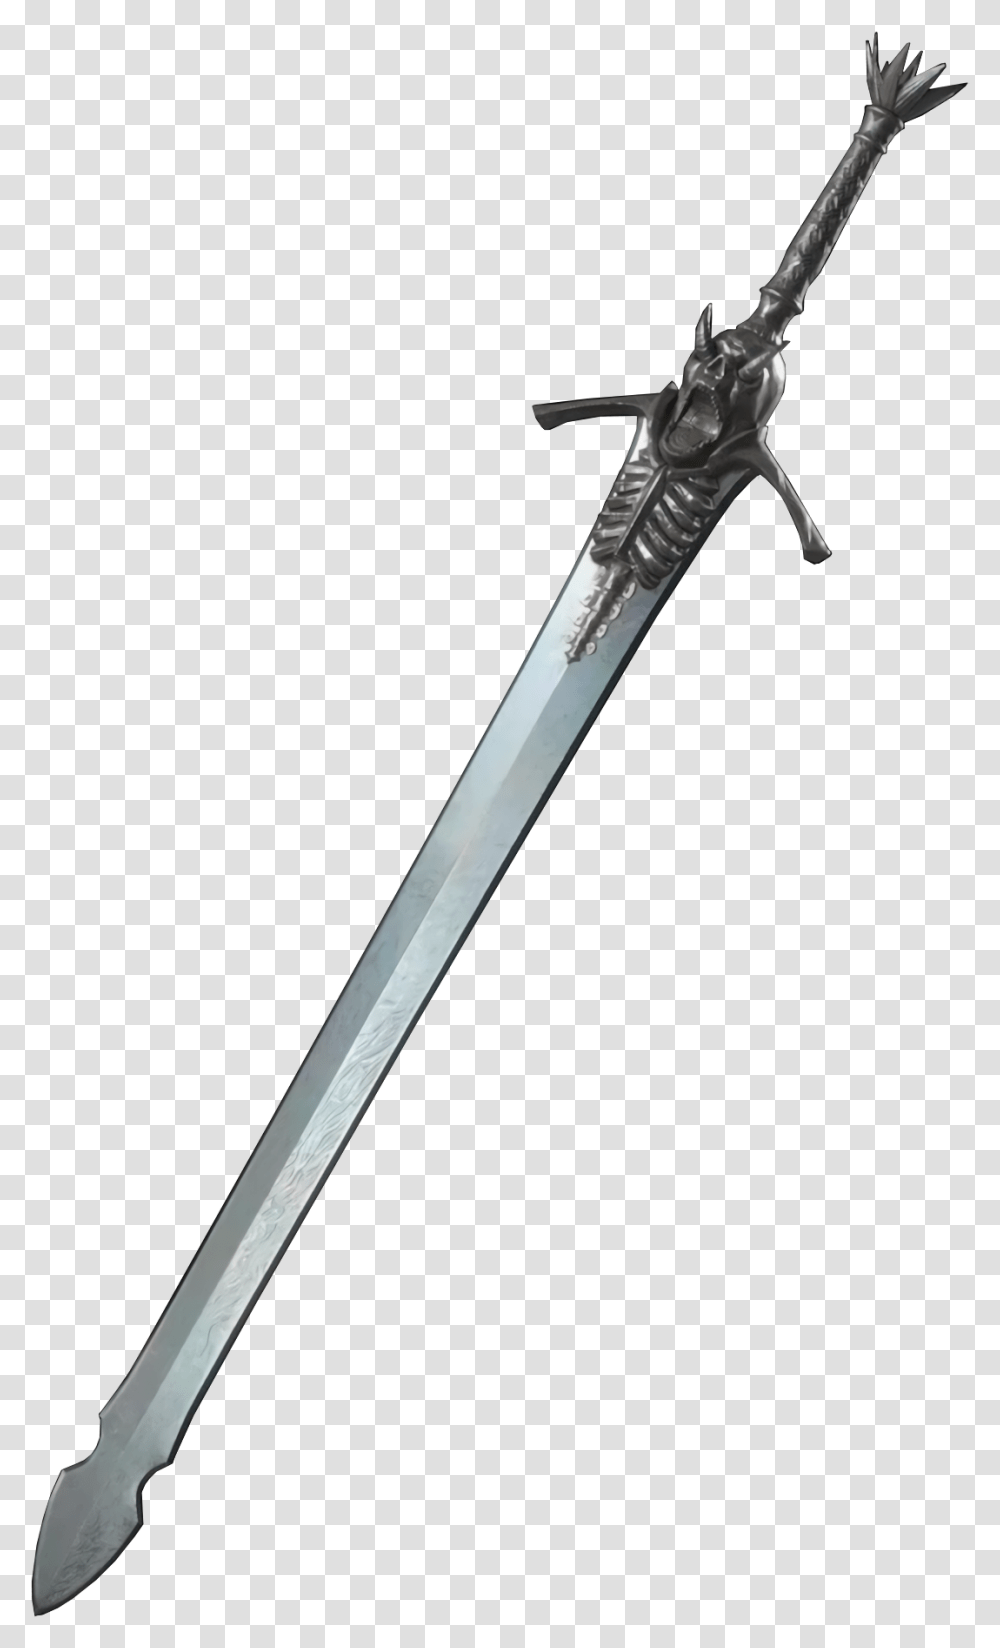 Voir Le Sujet Prcdent Devil May Cry Sword, Blade, Weapon, Weaponry Transparent Png